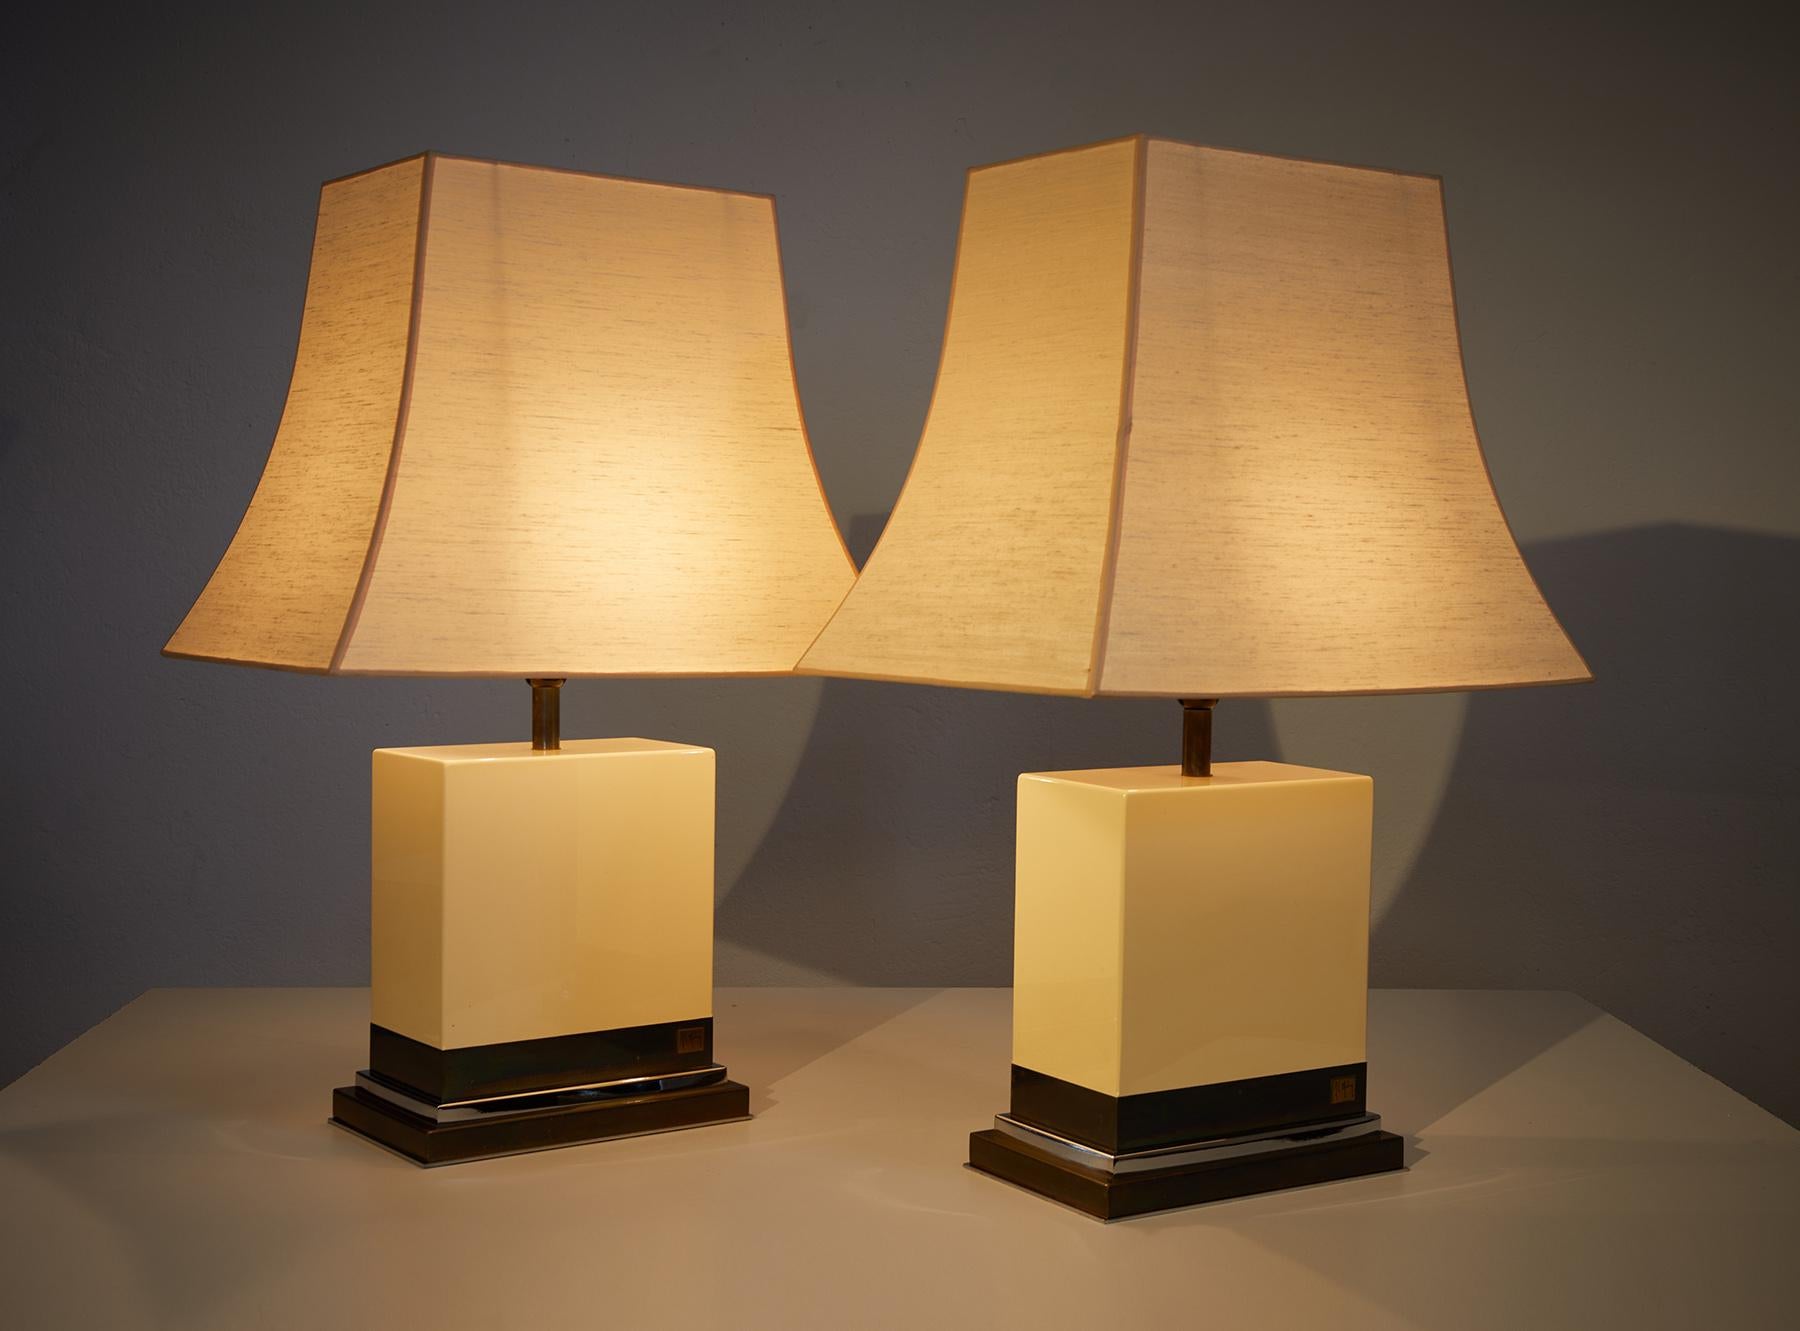 Pair of ivory lacquered table lamps by Jean-Claude Mahey, France 1970-80.

The top part of the lamps is composed of ivory lacquered wood which is in very good condition and the base is composed of brass and chrome. 

Both lamps are signed by the